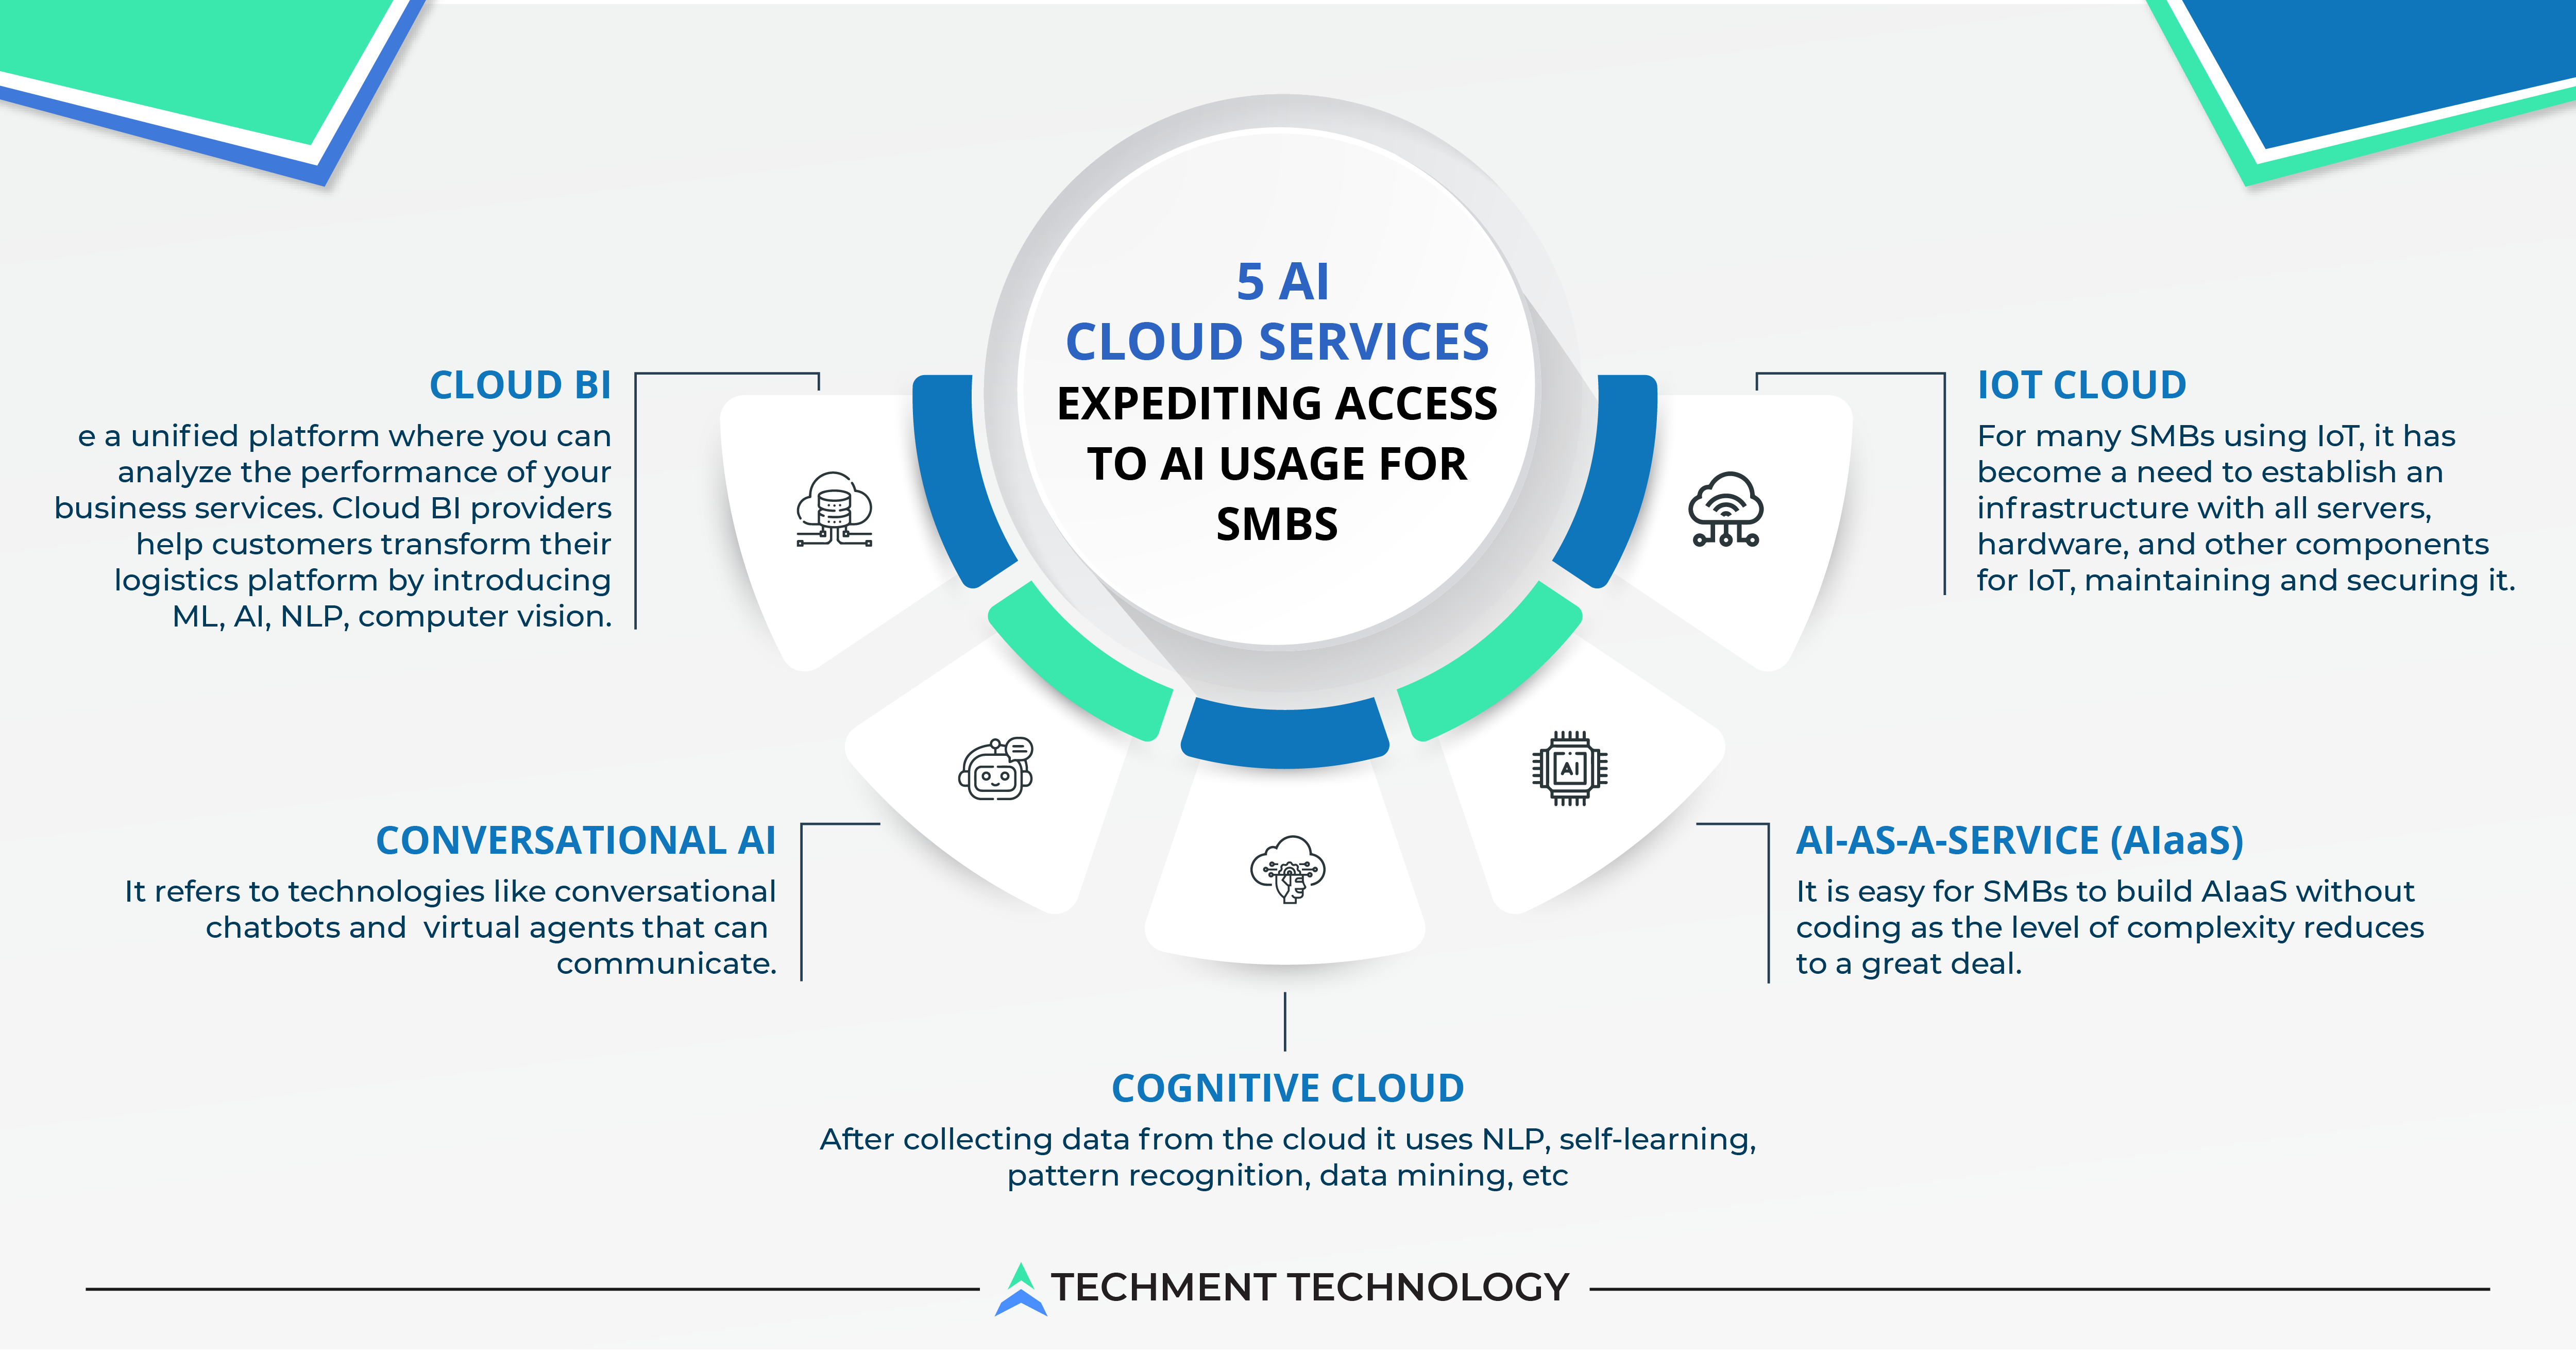 5 AI Cloud Services Expediting Access to AI usage for SMBs